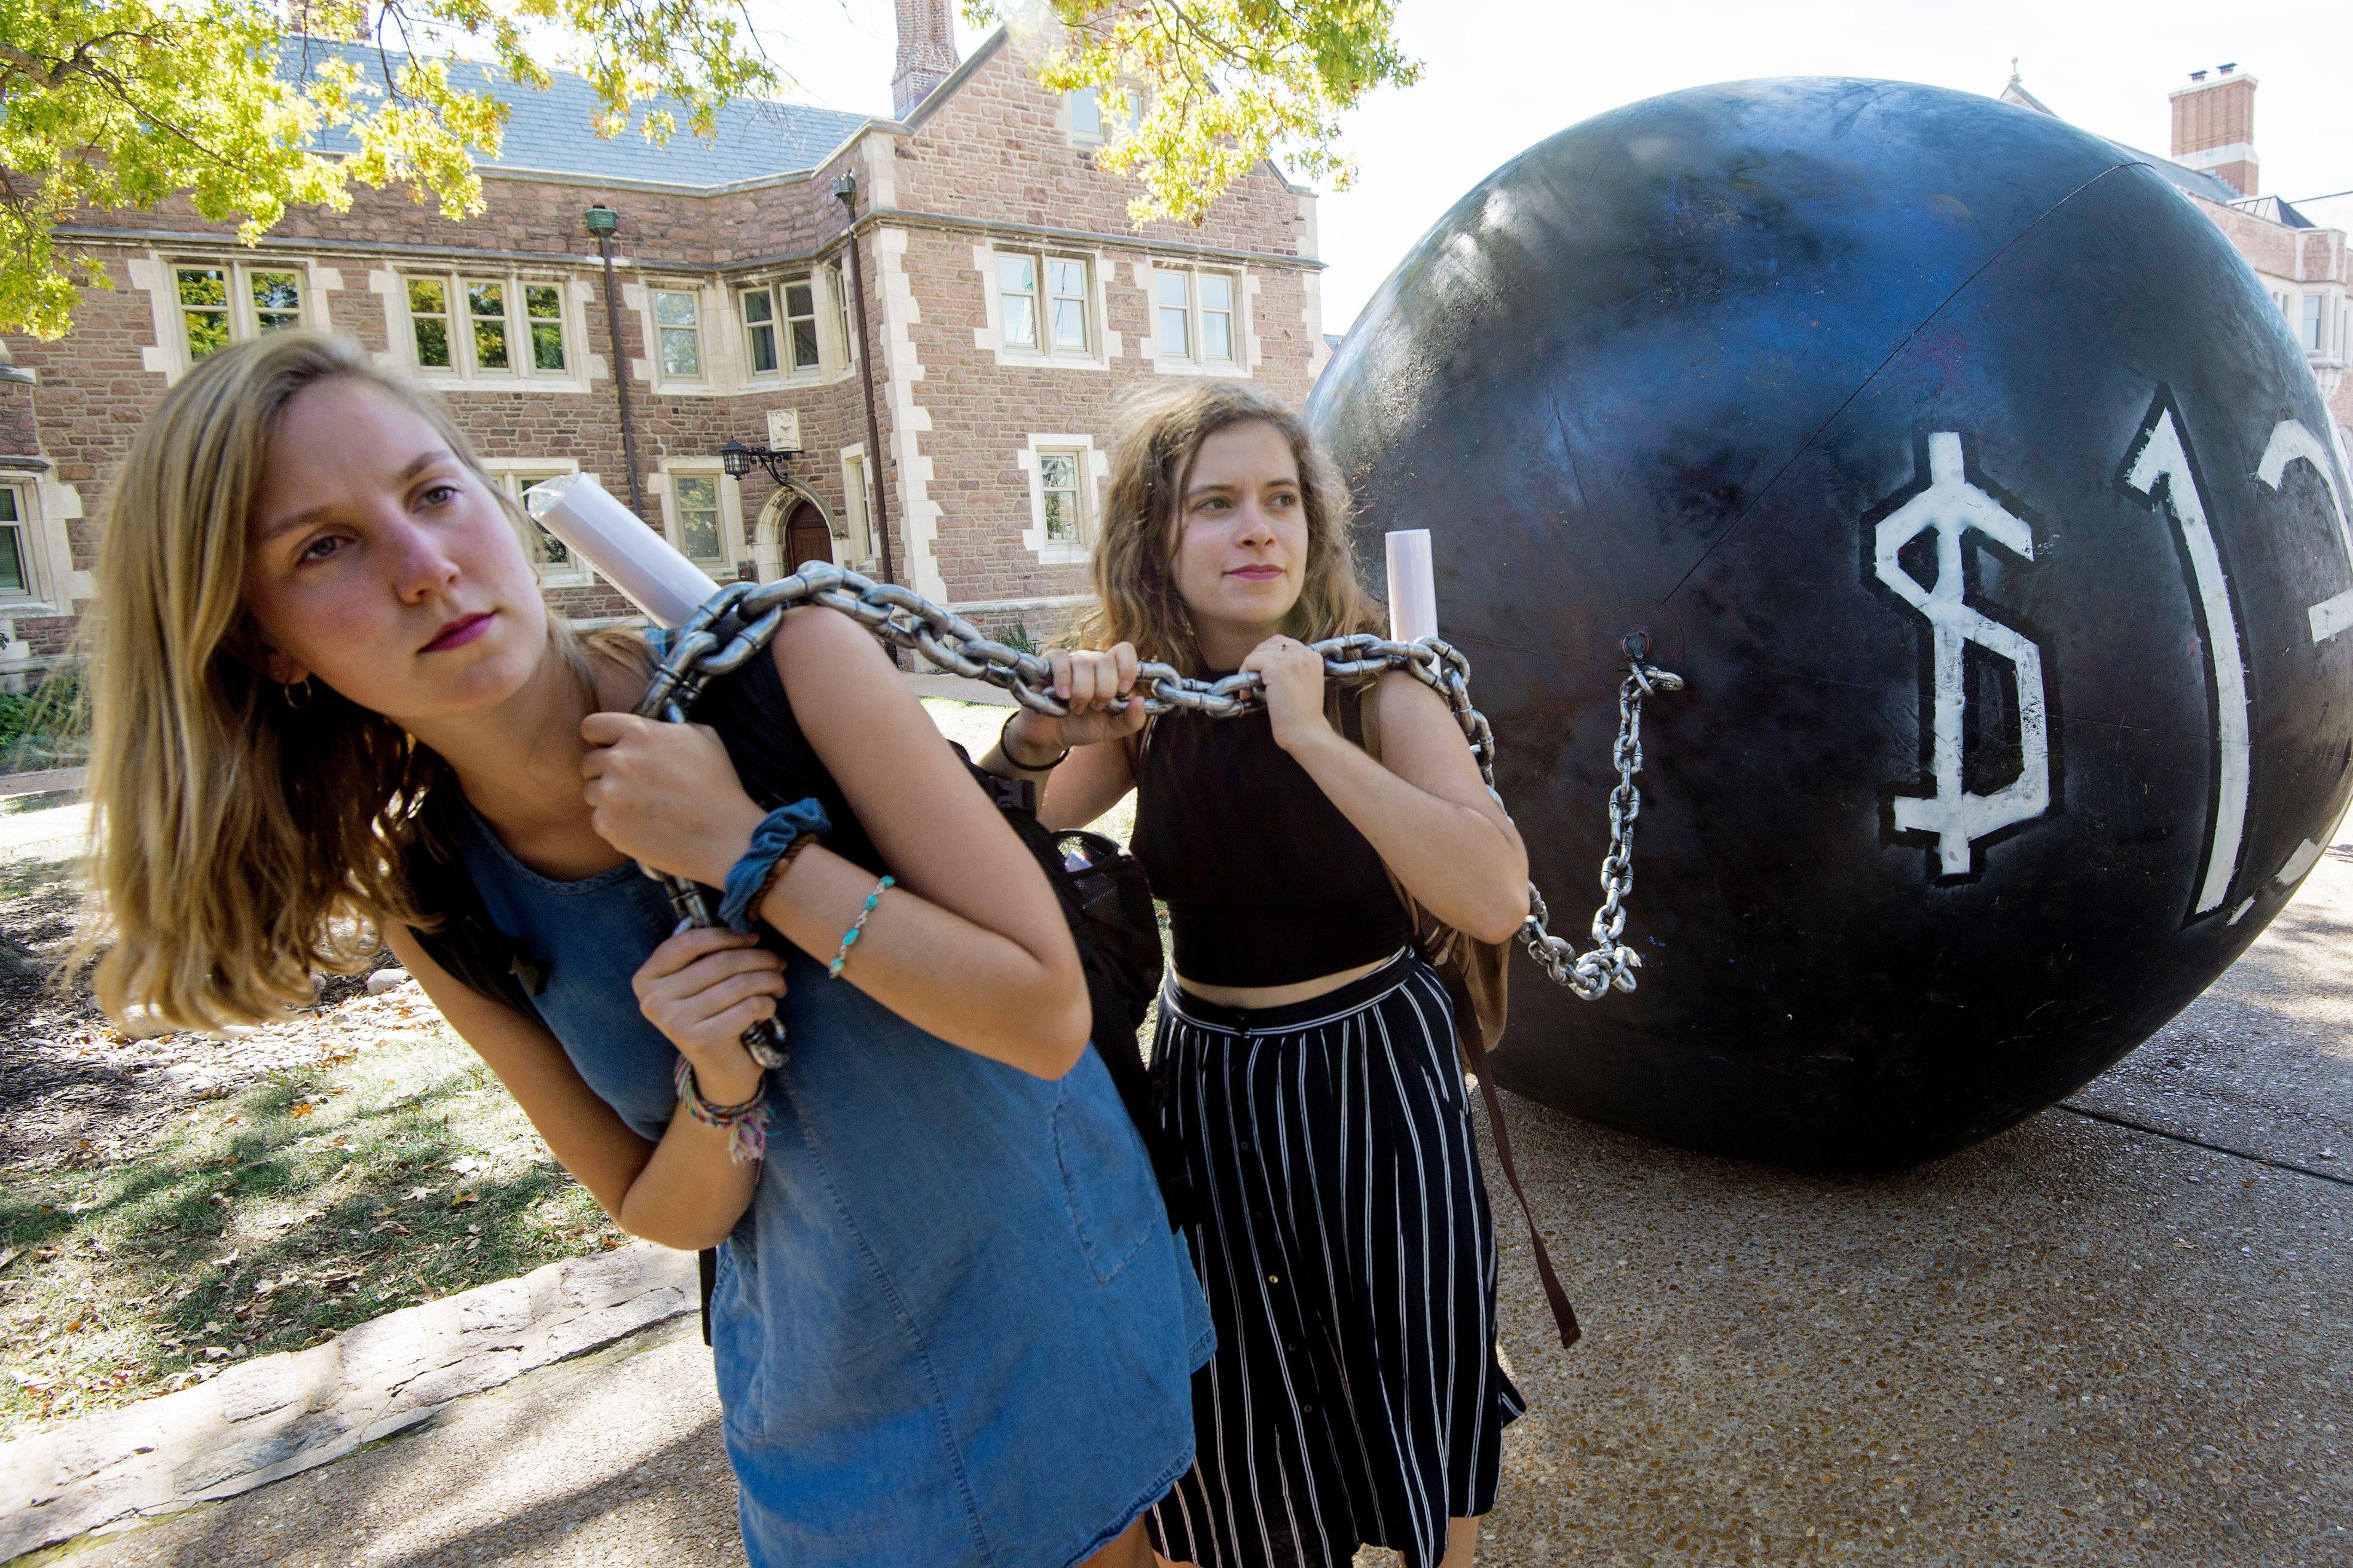 Two young women hold a chain connected to a gigantic black ball with $1.4 trillion written on it.